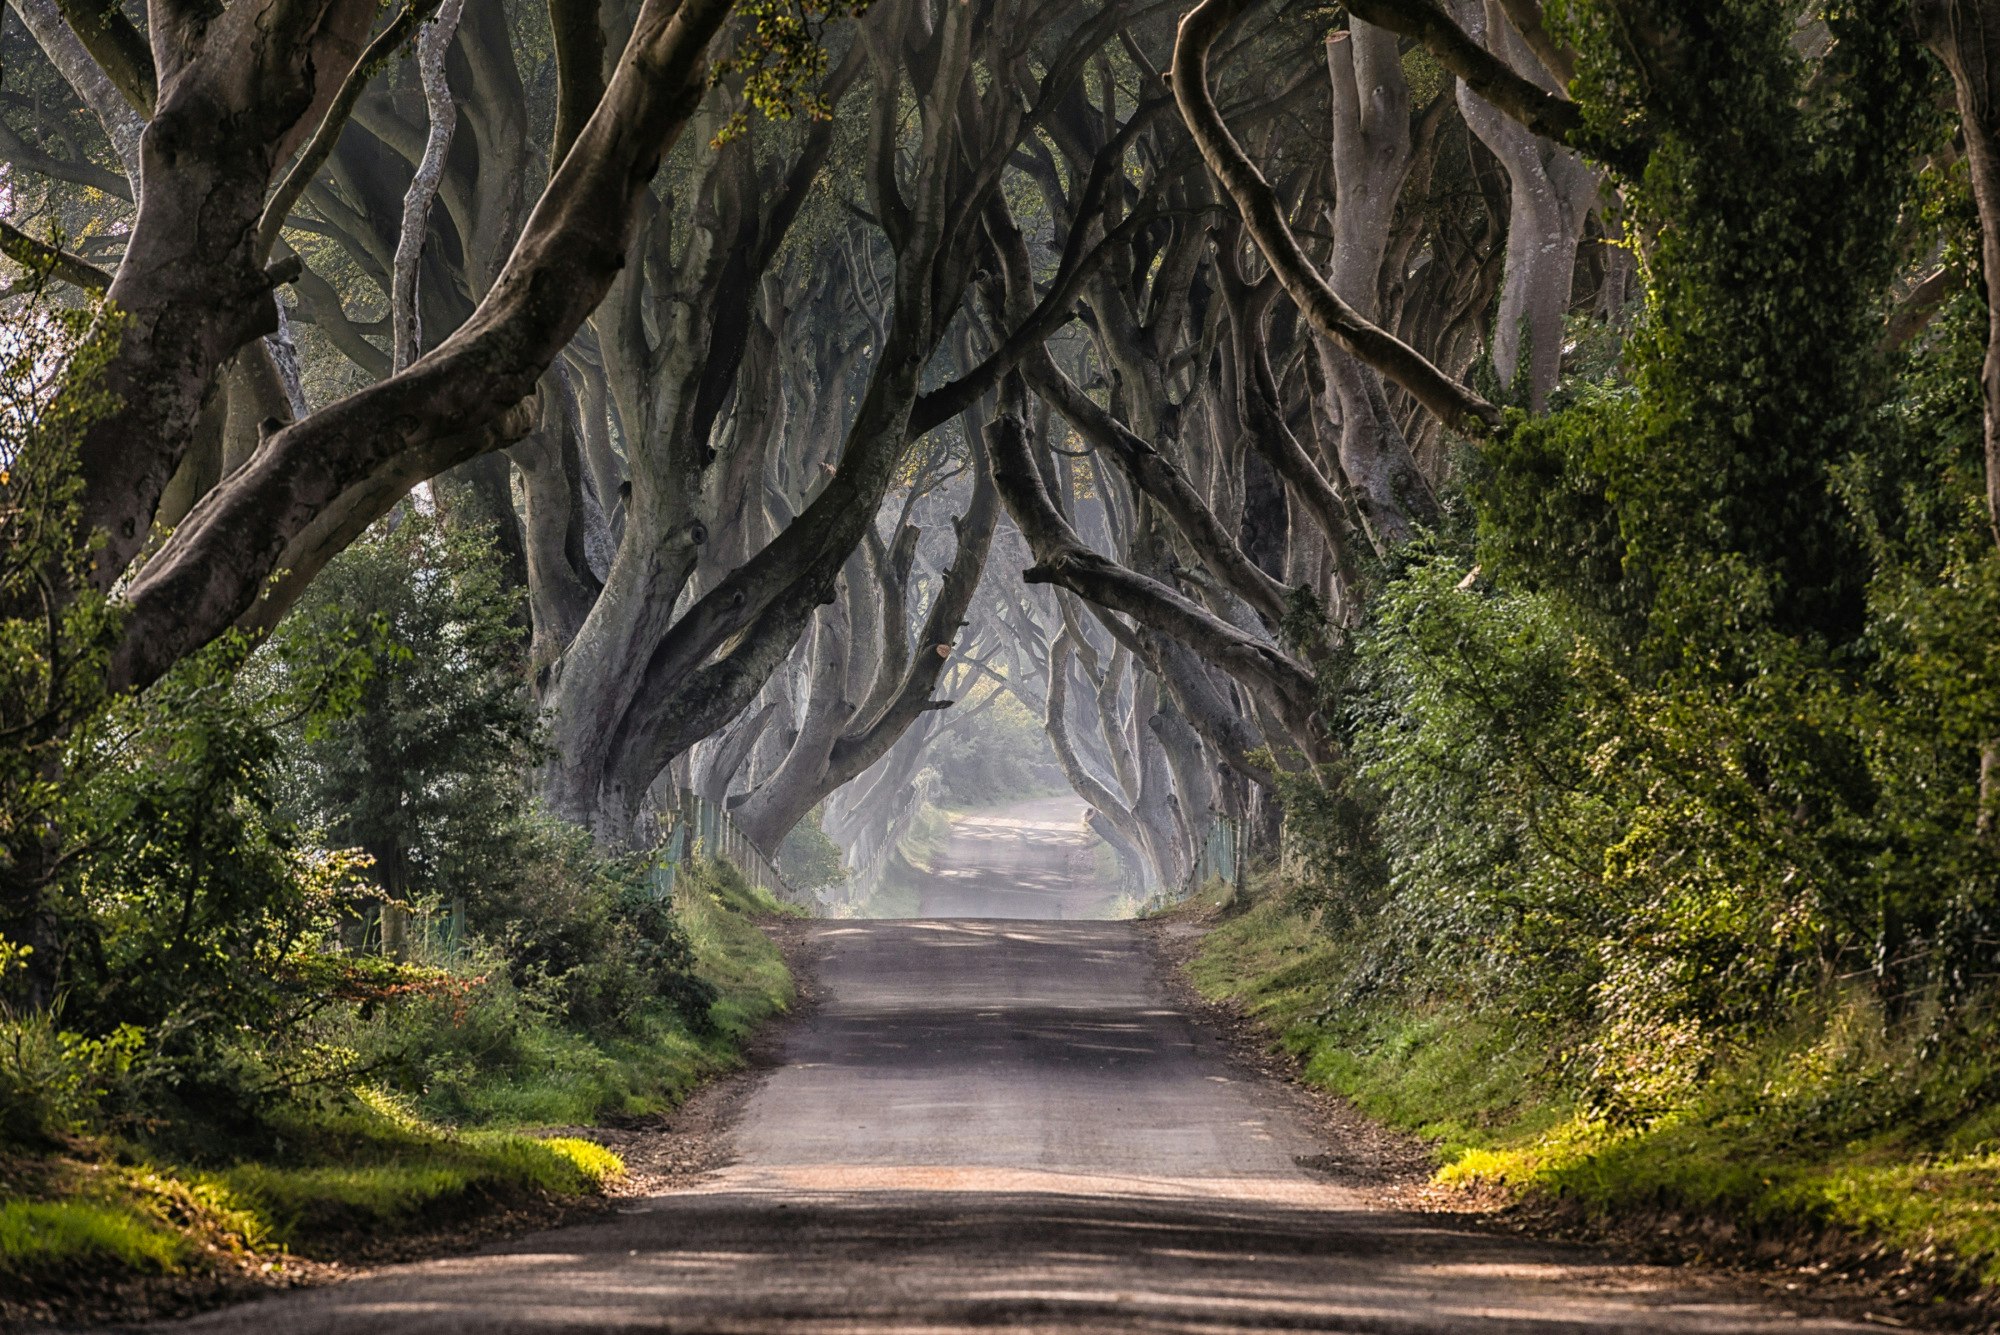 The Dark Hedges road in Country Antrim, Northern Ireland.